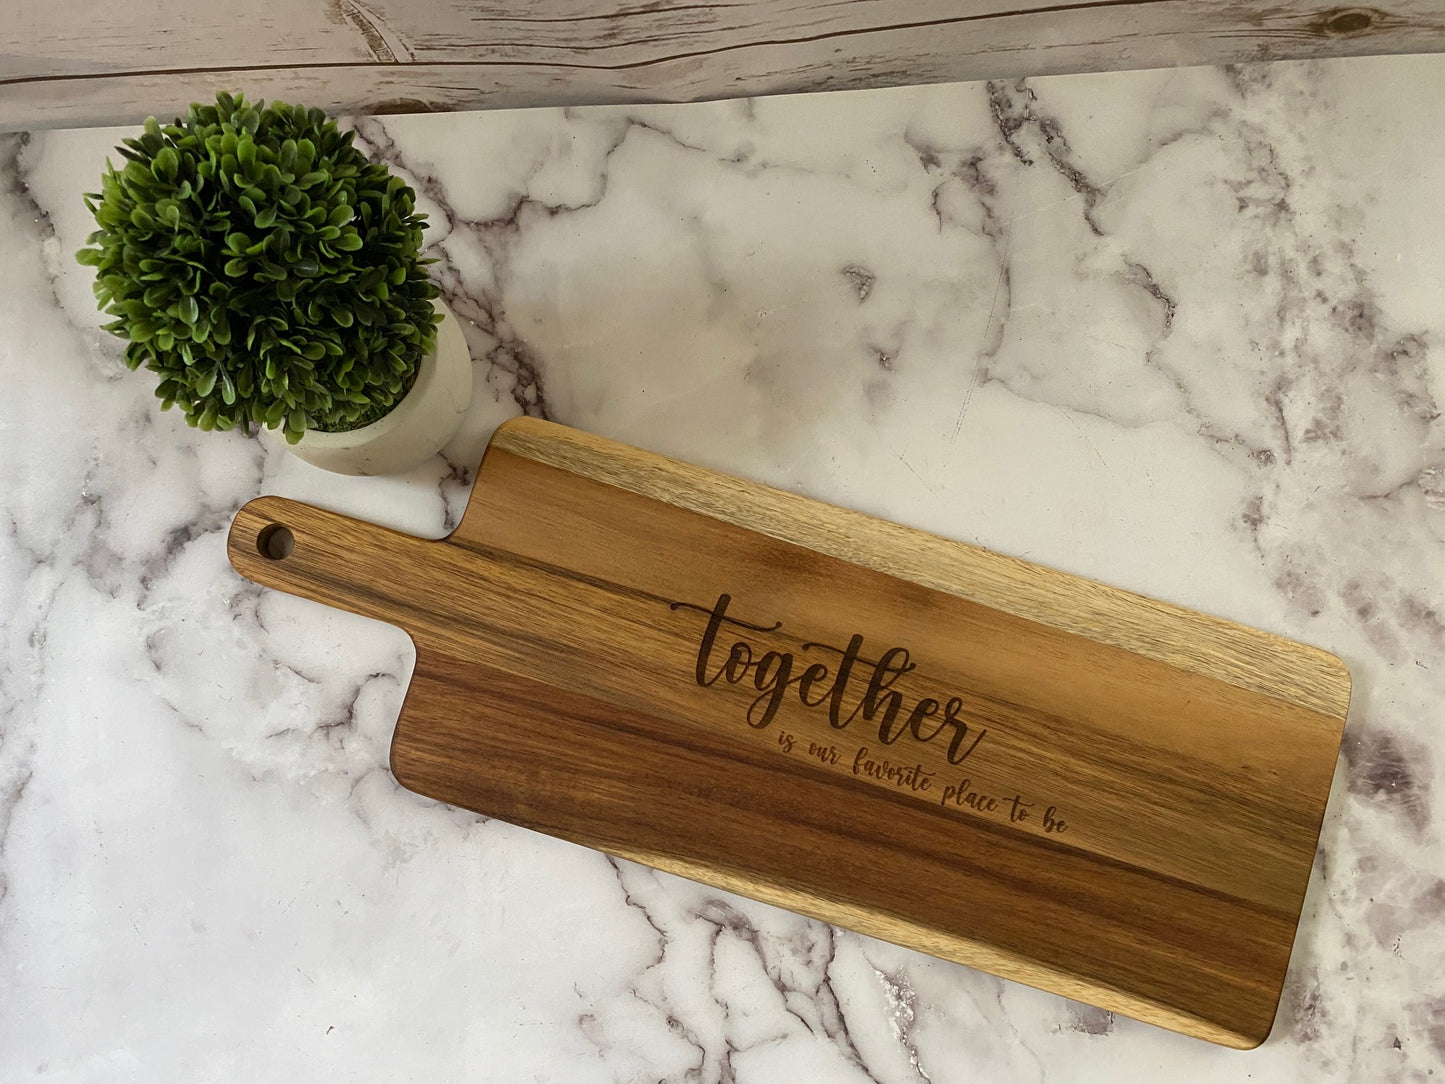 "Together is our Favorite Place to be" charcuterie paddle board